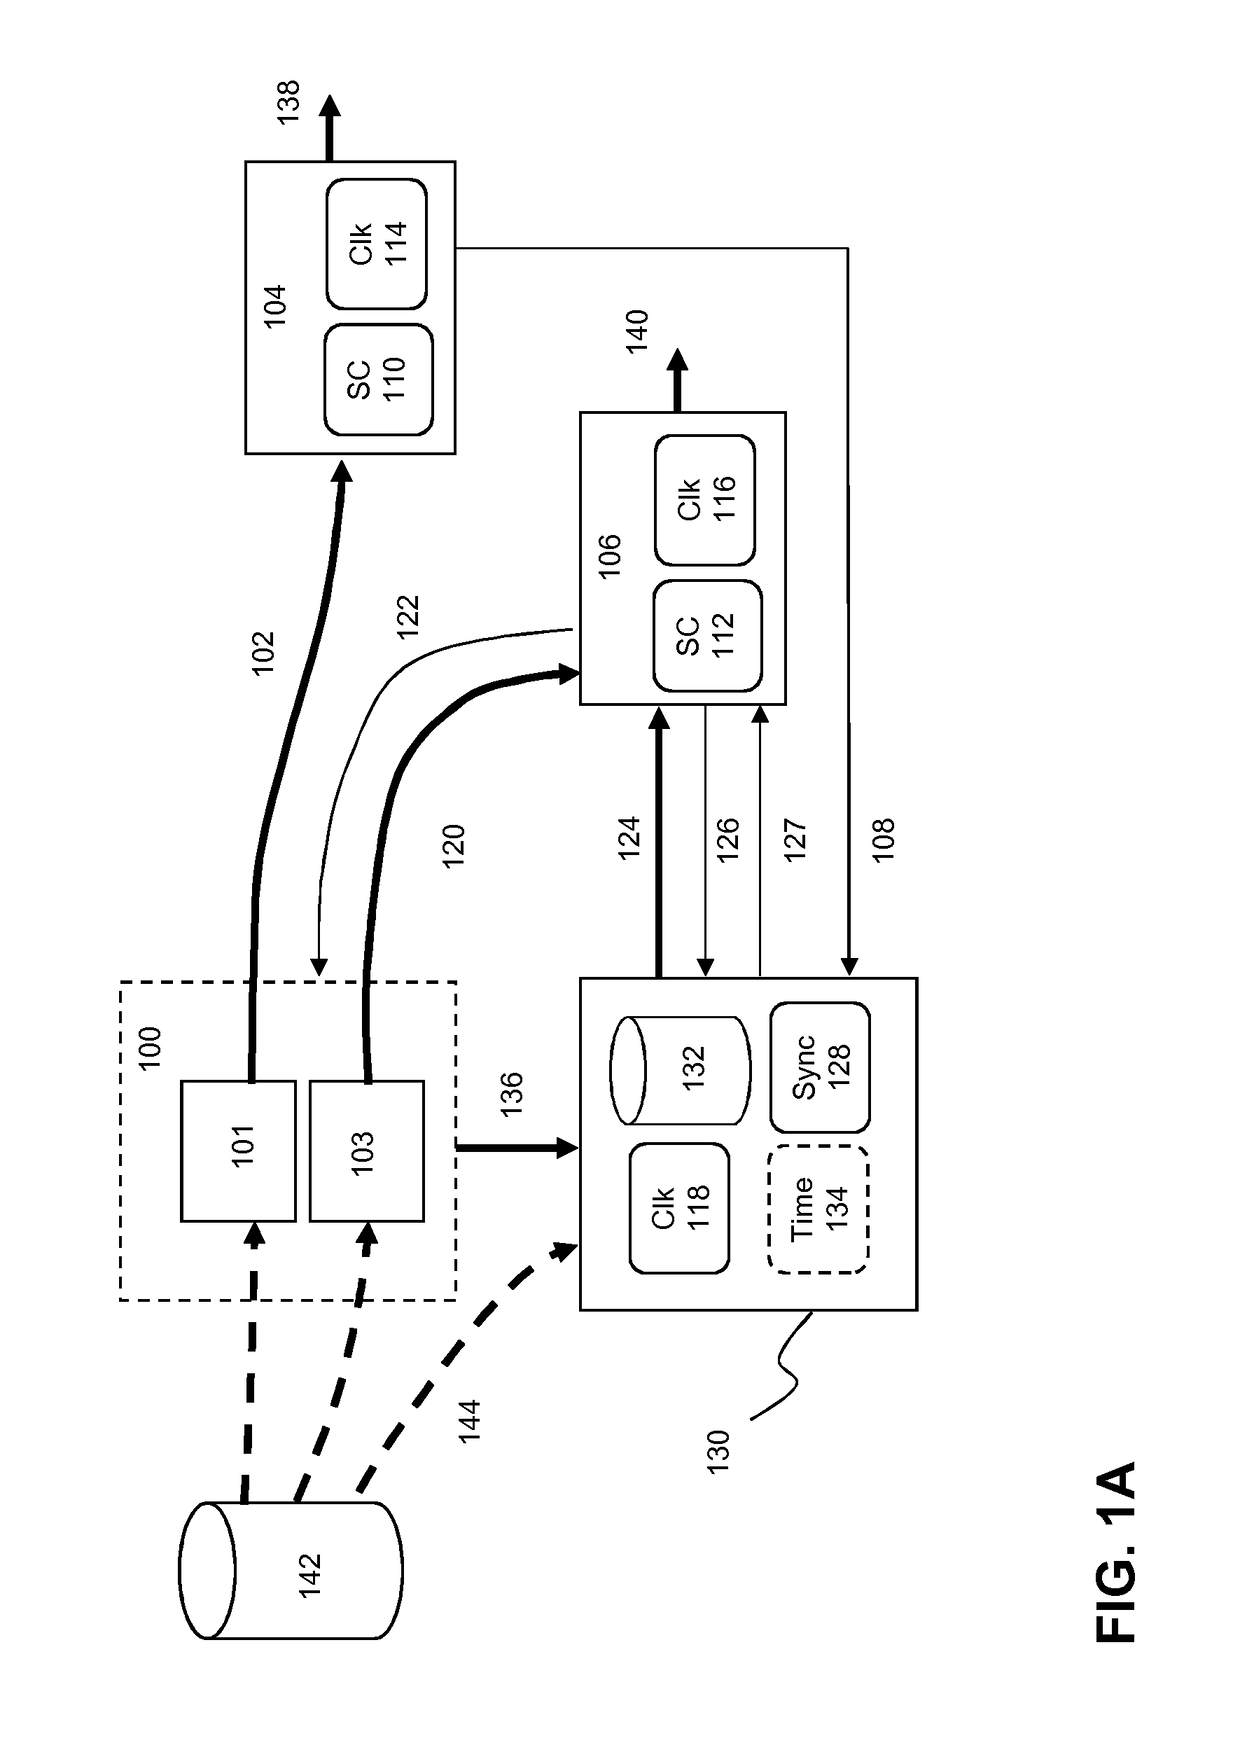 Synchronized data processing of broadcast streams between receivers, including synchronized data processing between a receiver that is in the process of processing a stream and a receiver that wants to join the stream